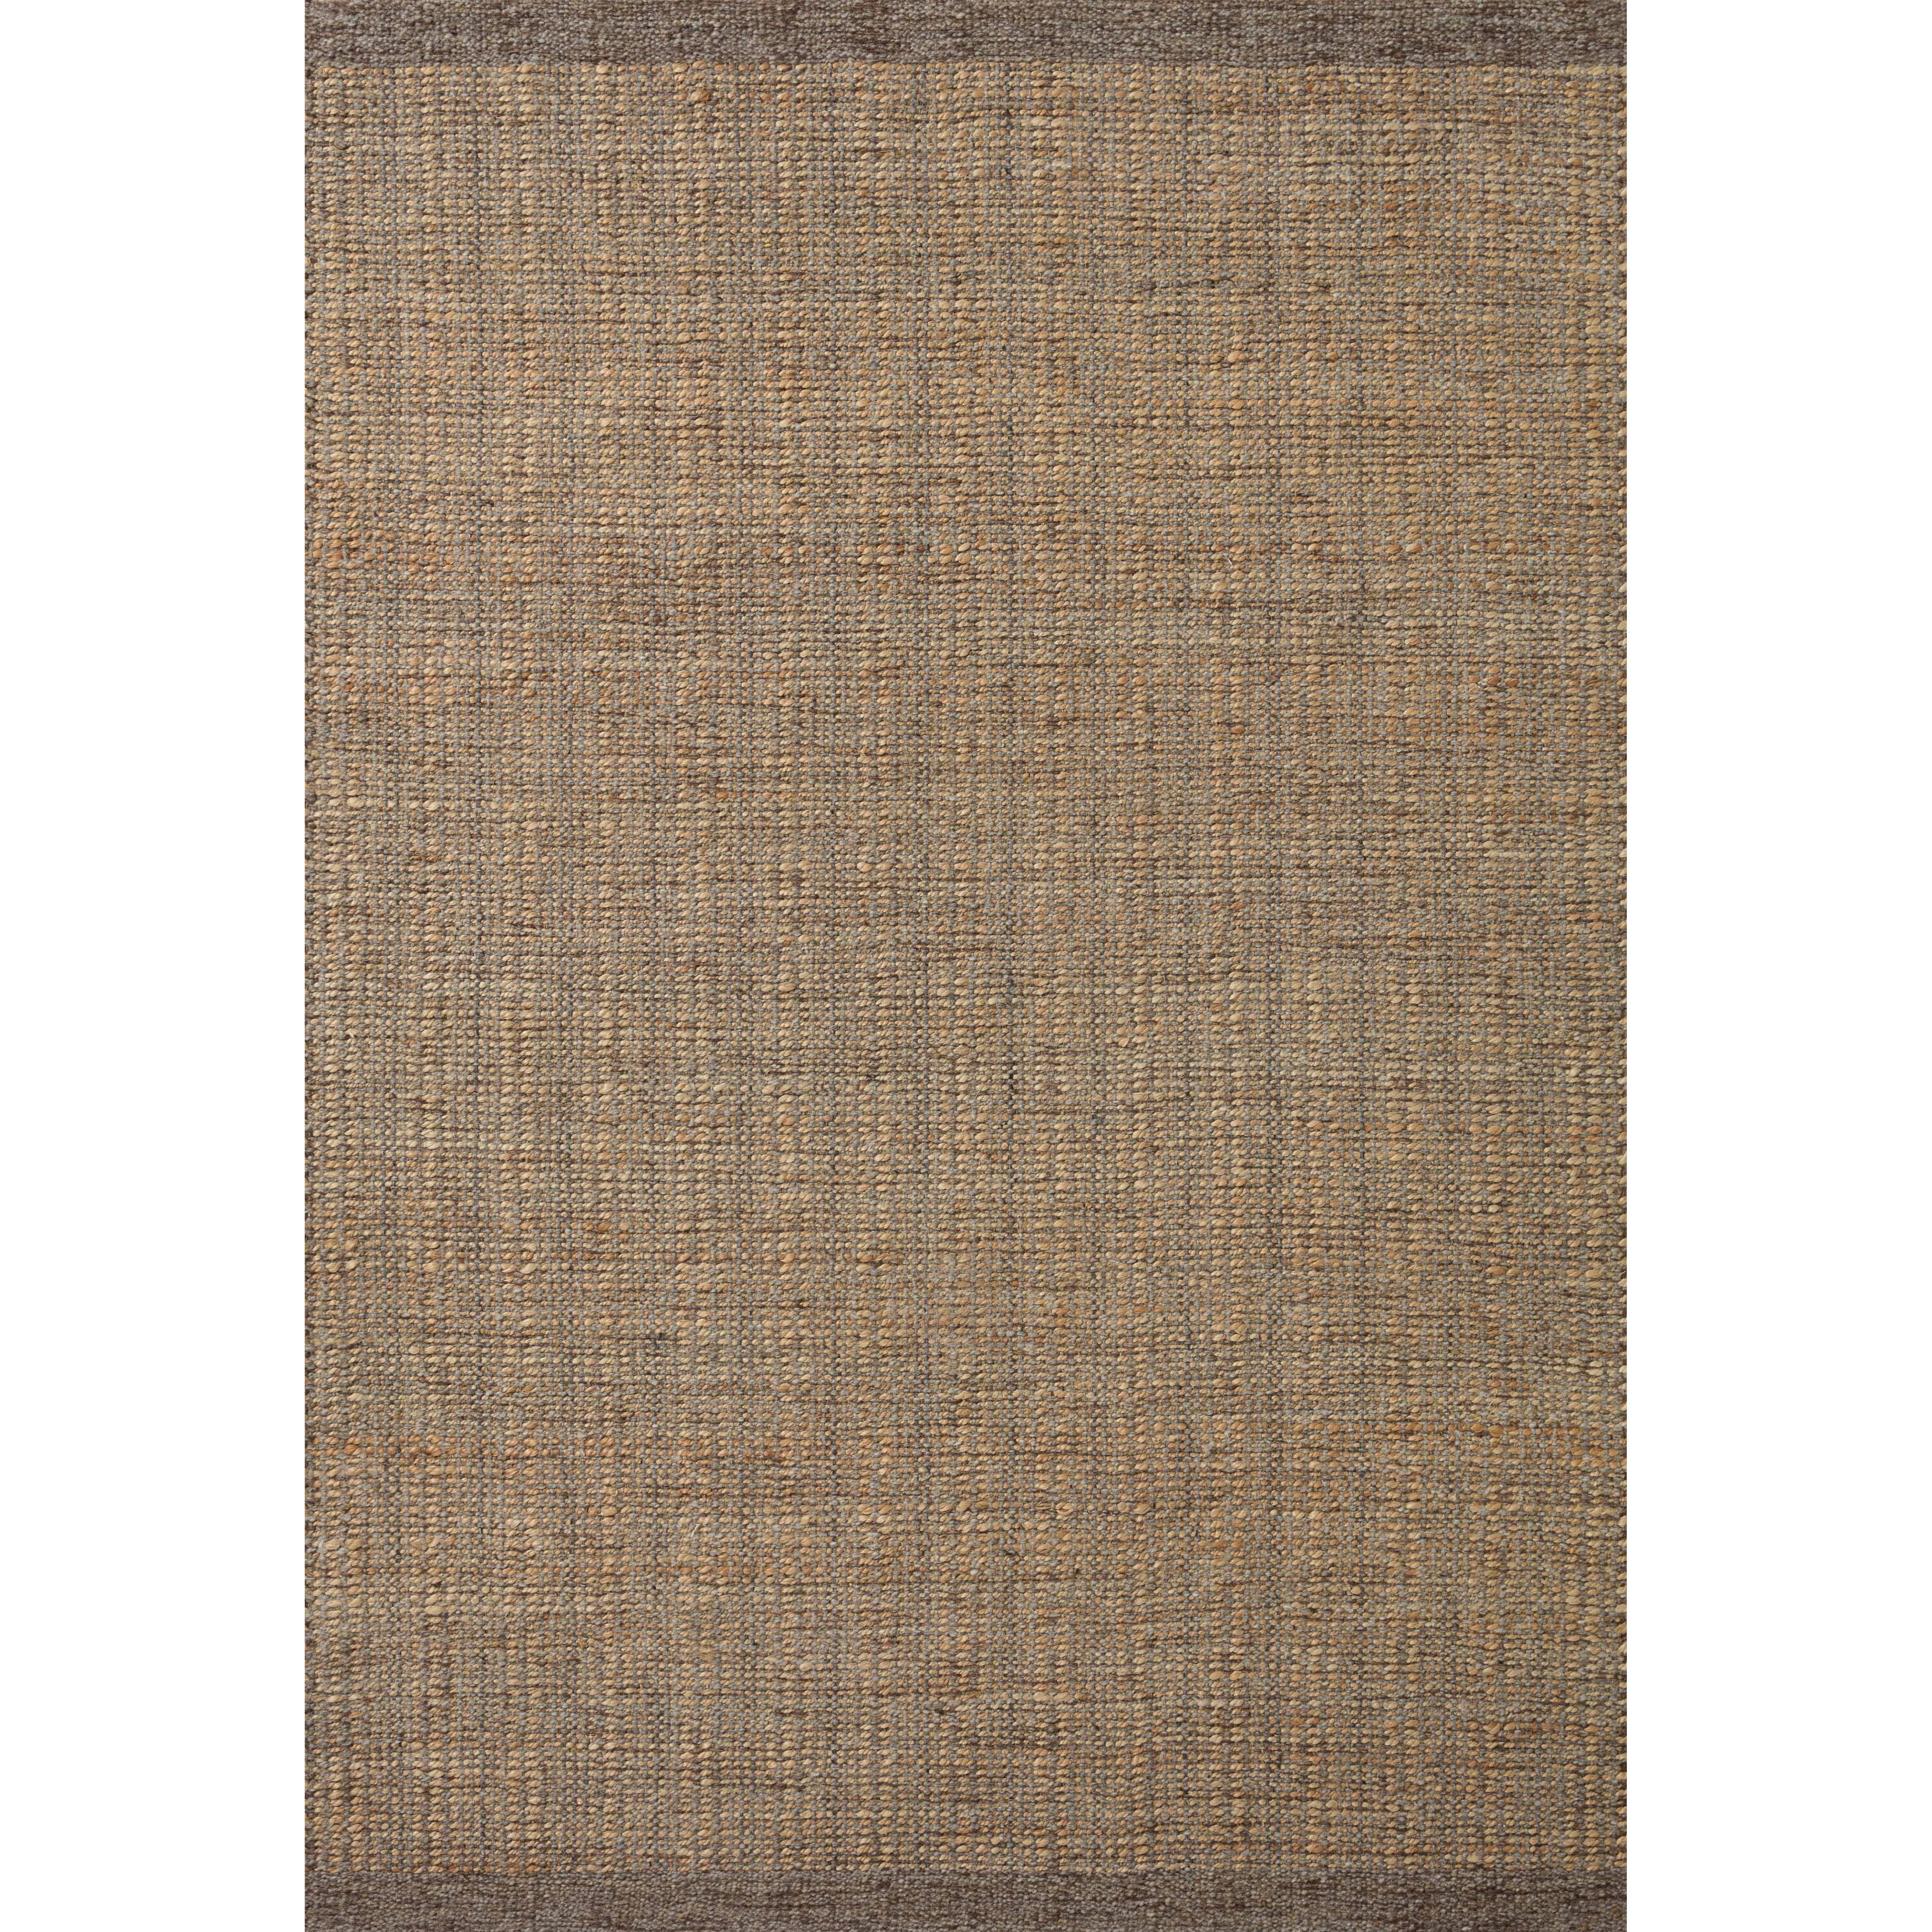 Hand-woven of jute and wool, the Cornwall Mocha / Natural Rug has a natural, organic look with a clean and classic striped design. This area rug collection is an elegant neutral that styles easily in a range of living rooms, bedrooms, dining rooms, and even mudrooms. Soft, earth-toned colors complement the rug’s natural materials and aesthetic. Amethyst Home provides interior design, new construction, custom furniture, and area rugs in the Park City metro area.